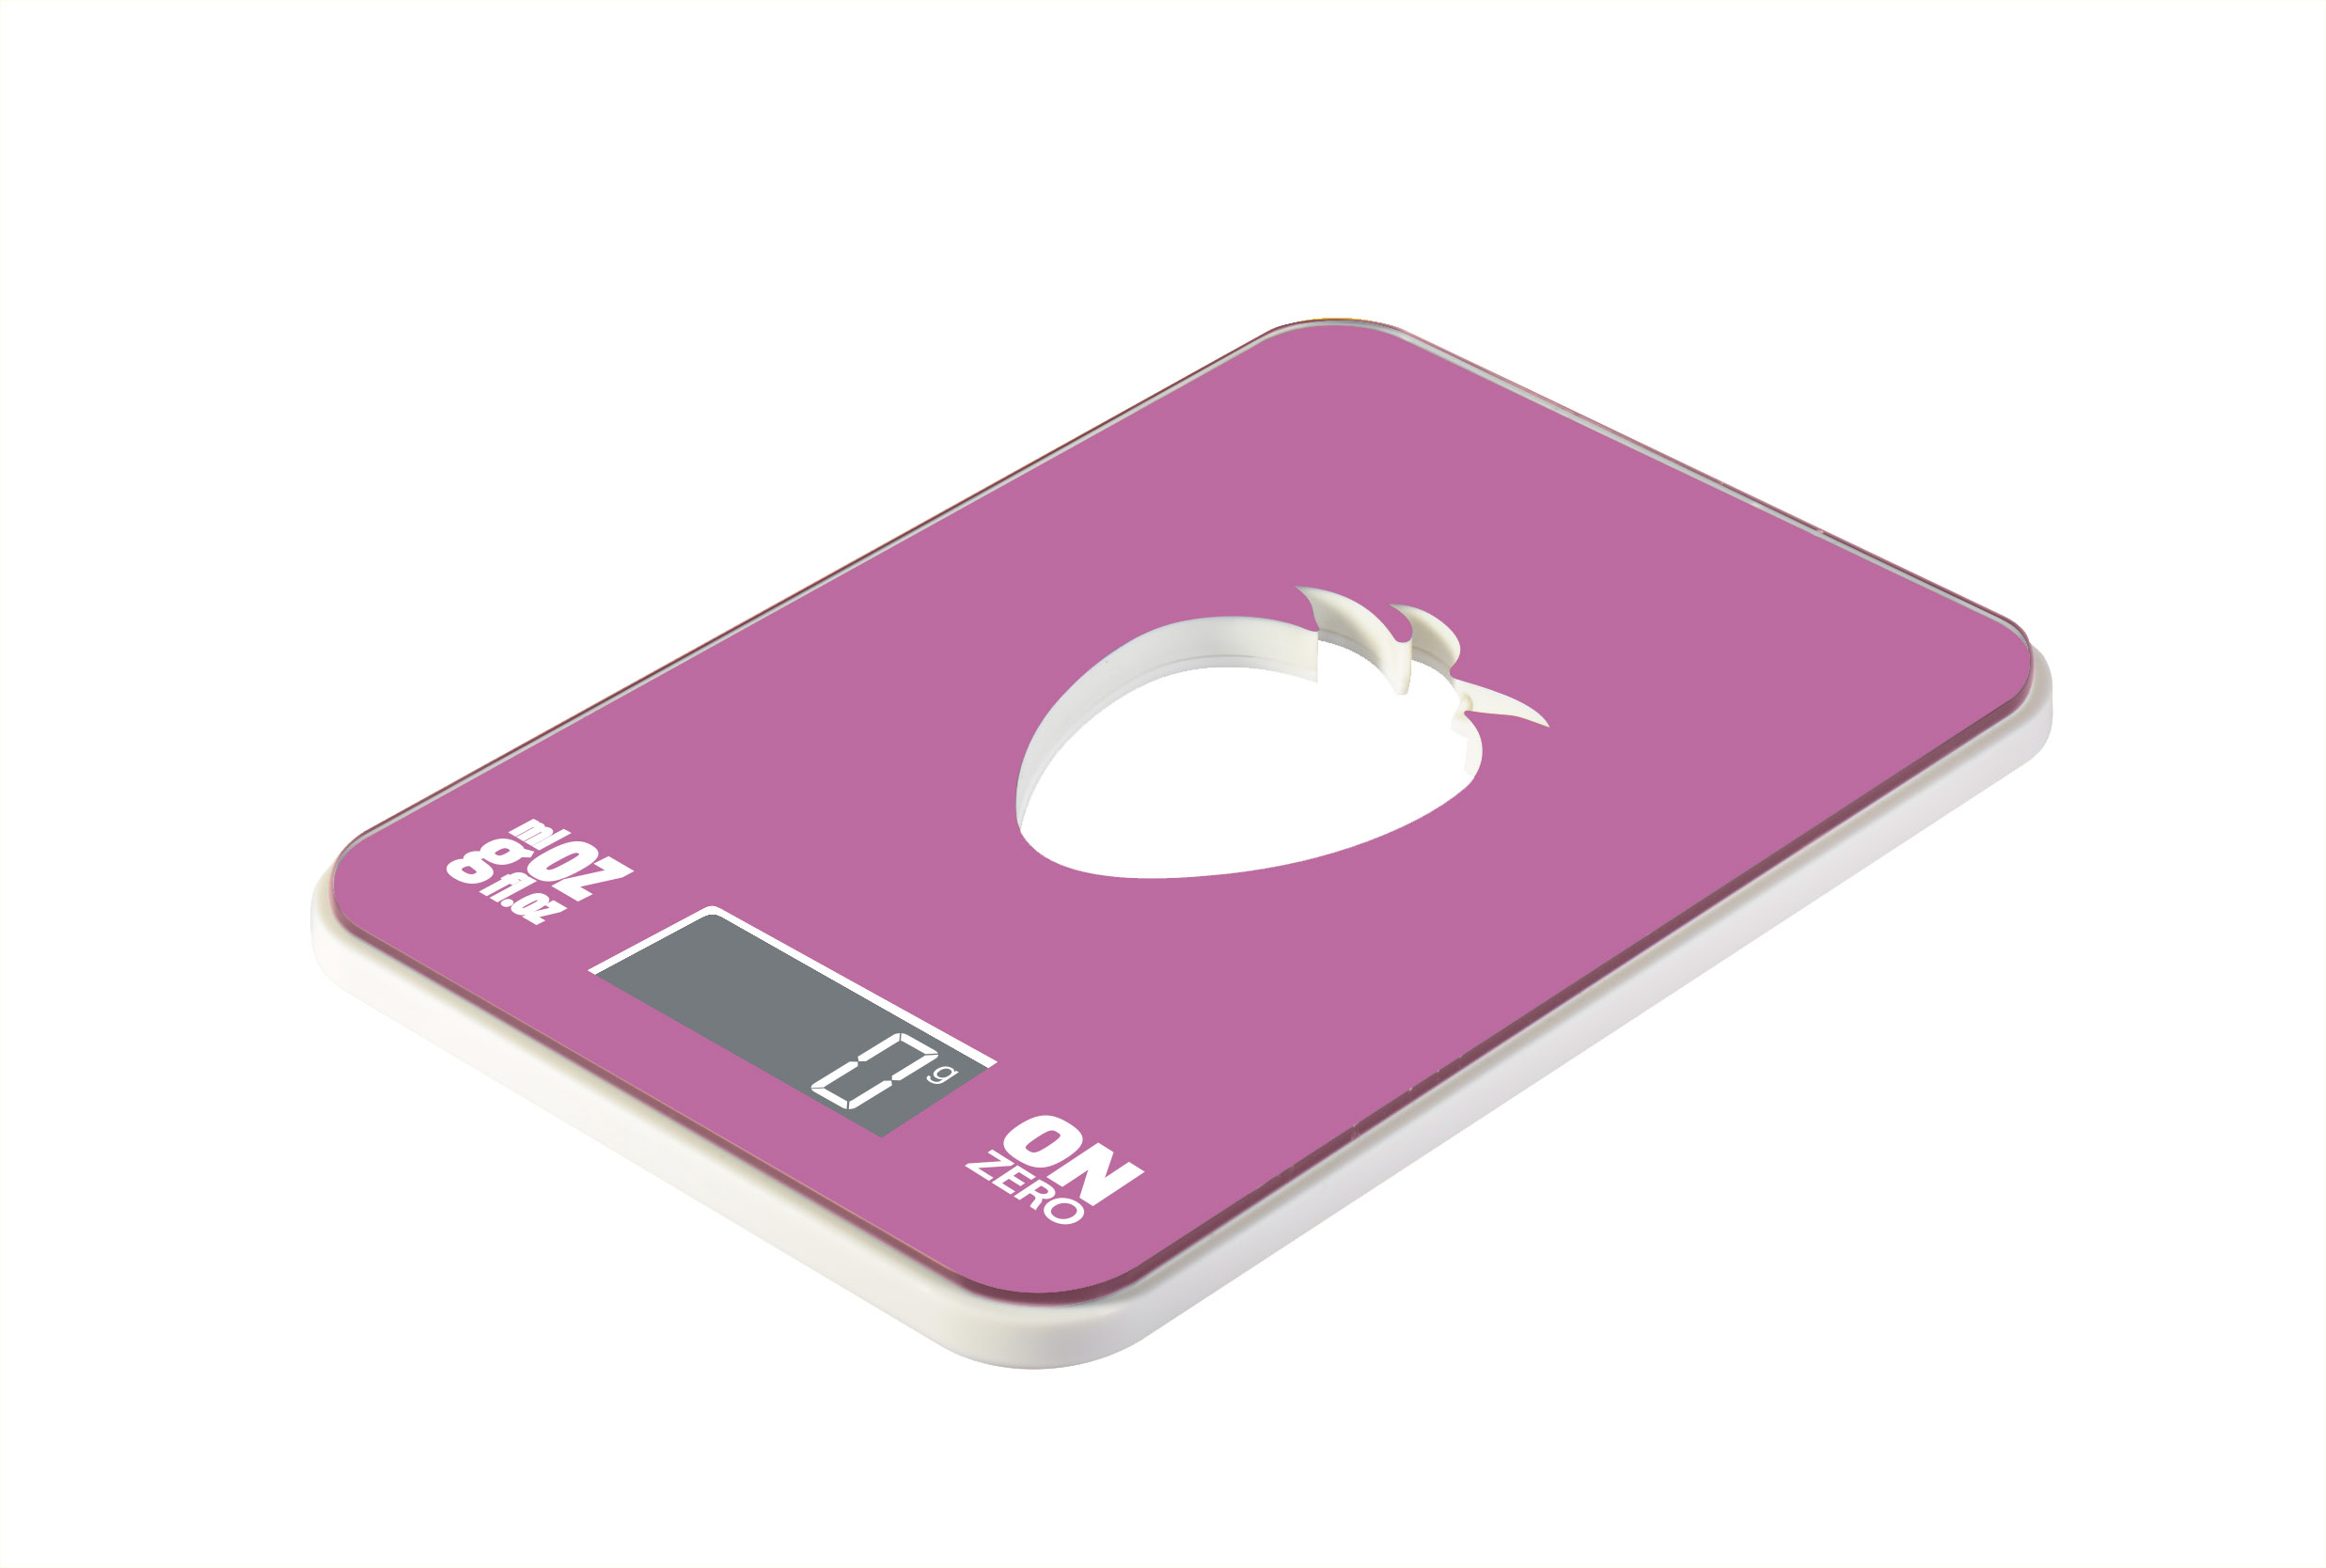 Slim & touch weighing scale 5kg